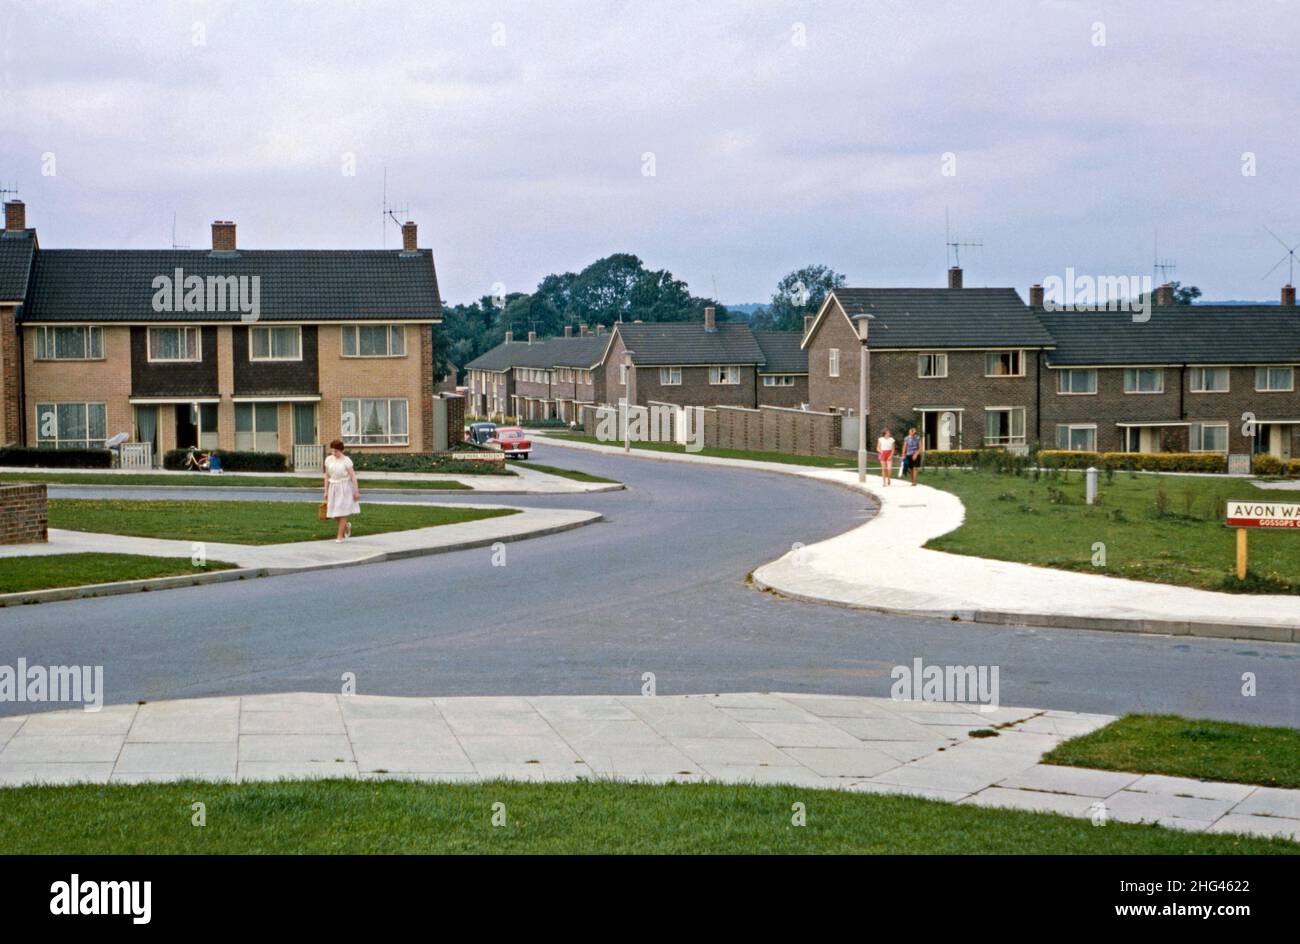 A view west along Rother Crescent in the Gossops Green area of Crawley ‘New Town’, West Sussex, England, UK in 1966. The neighbourhood, west of the town centre, was one of 14 suburbs developed to create the post-war ‘new town’. After the World War II, in order to relocate those in London’s poor or bombed-out housing, large numbers of people and jobs were moved to new towns around SE England and Crawley was the one of these – a vintage 1960s photograph. Stock Photo